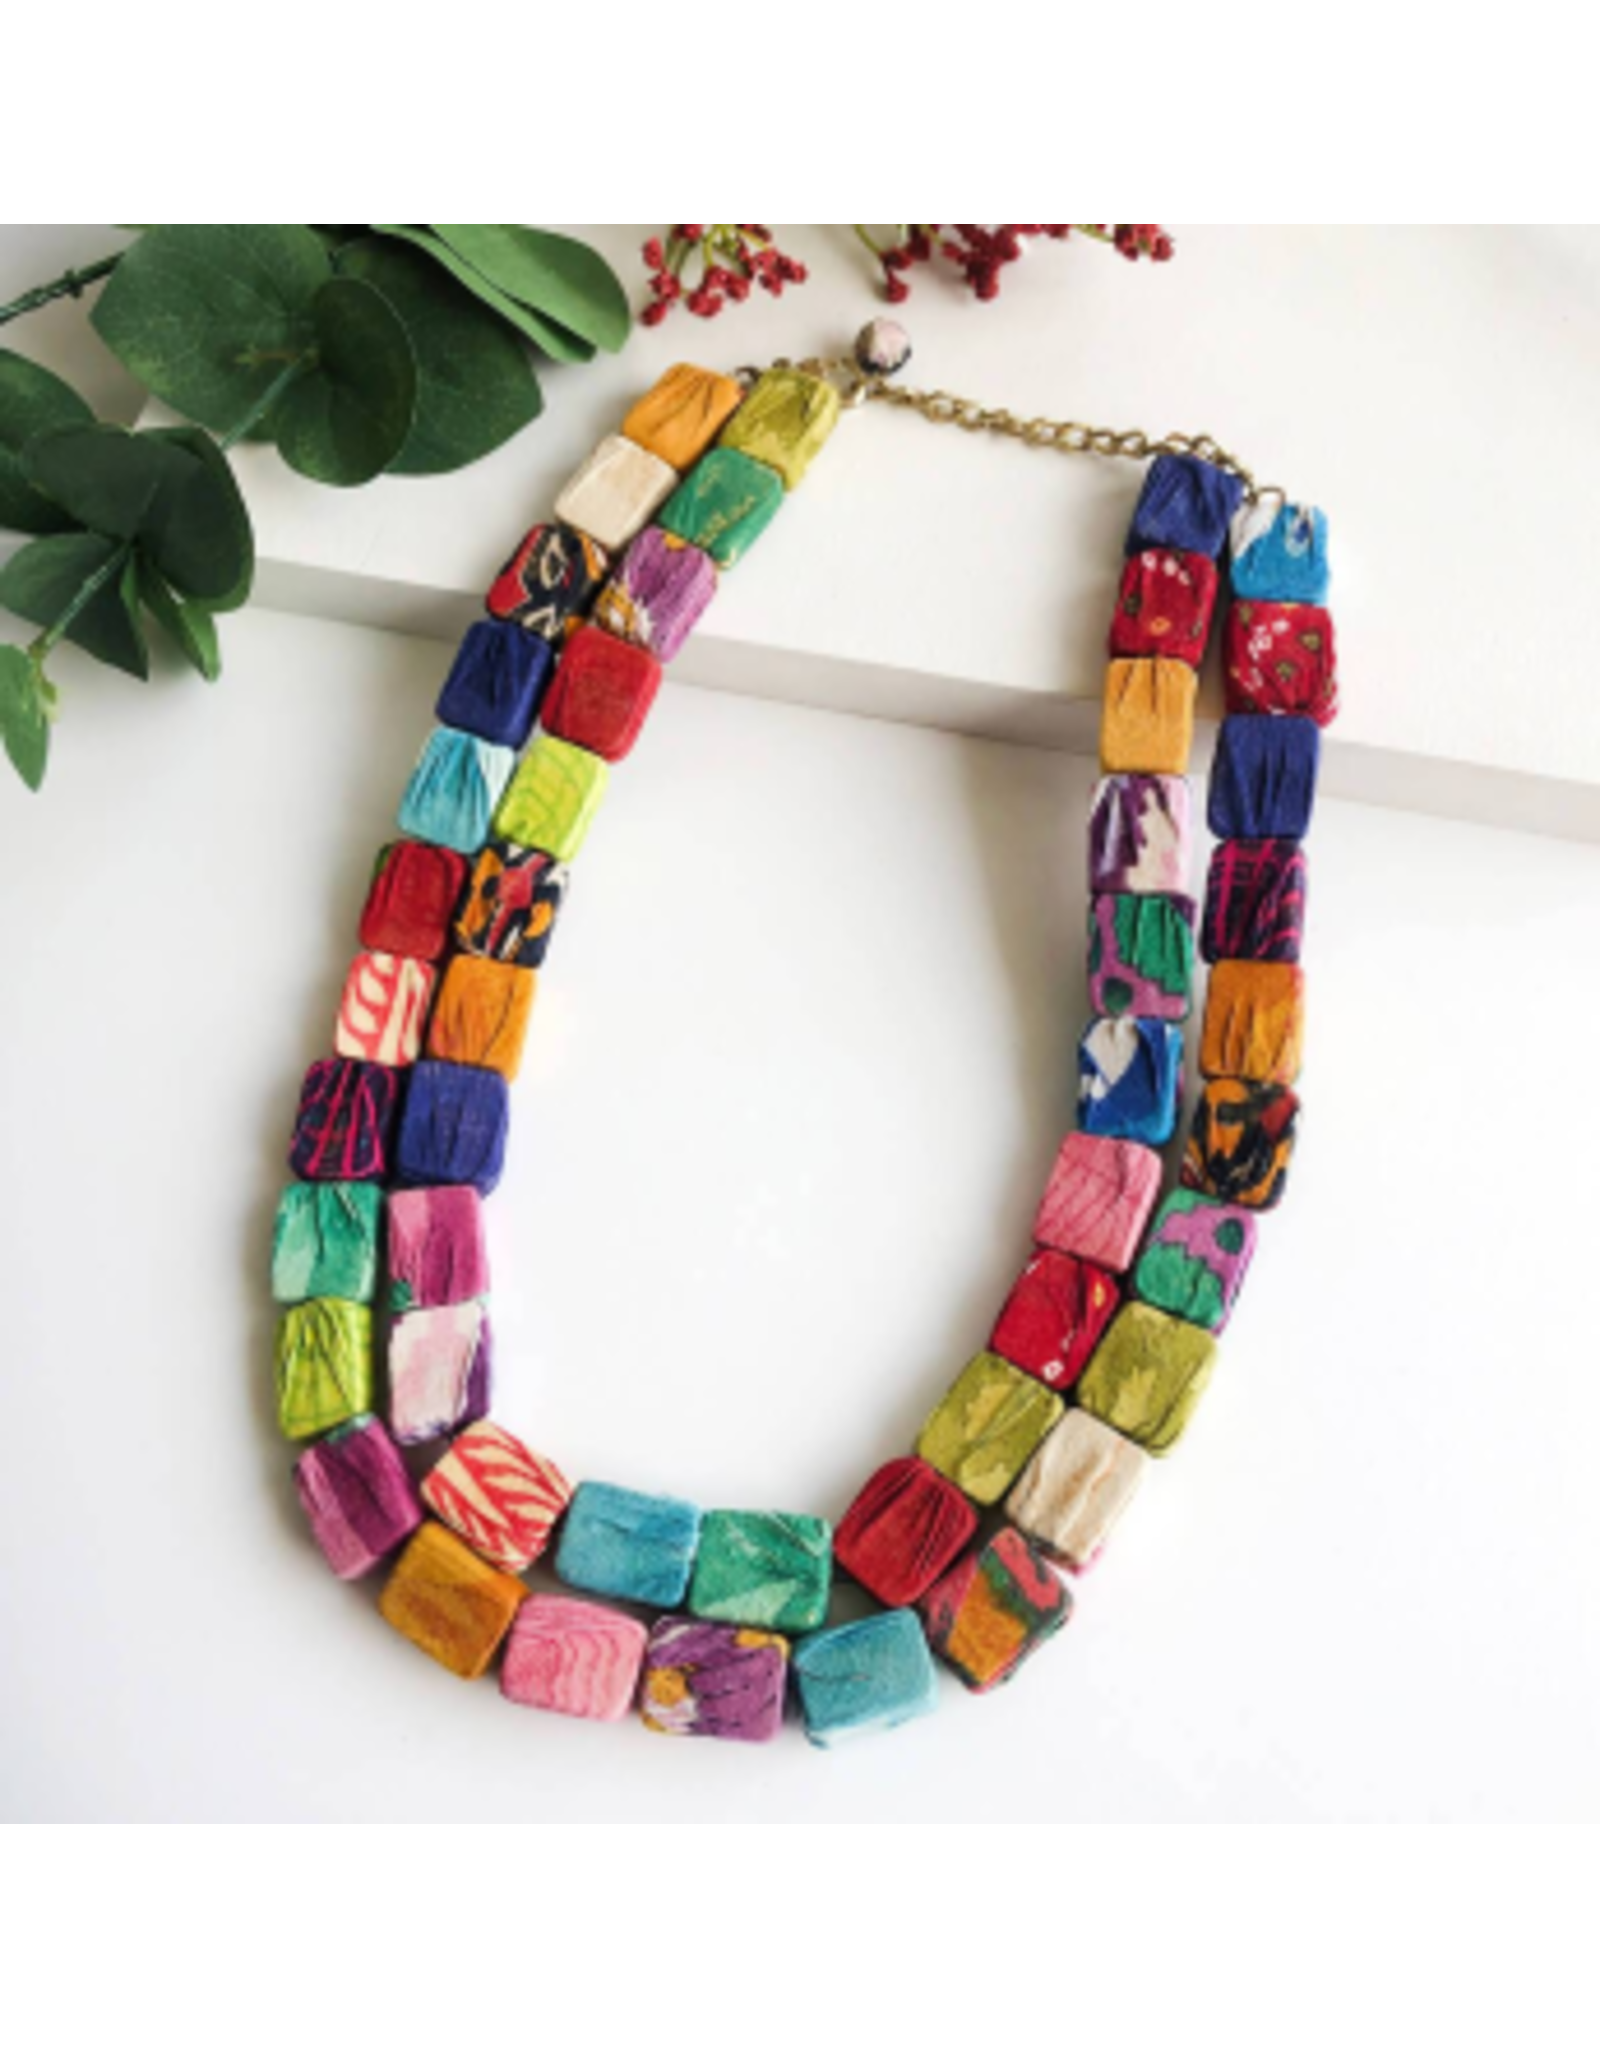 Trade roots Kantha Cubist Necklace, India